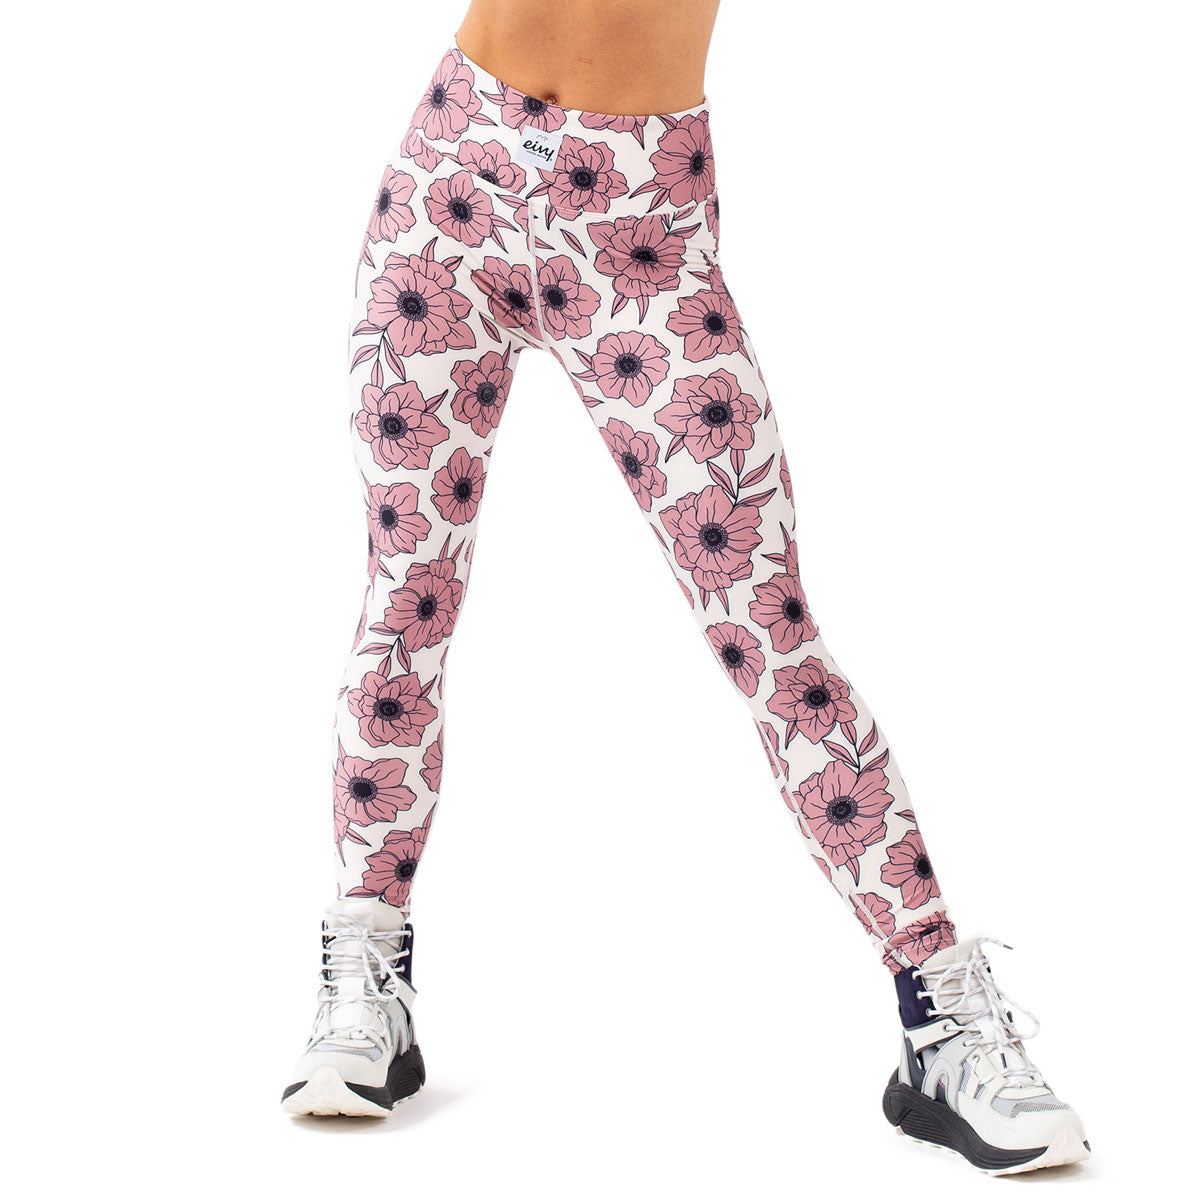 Eivy Icecold Tights Snowboard Base Layer - Wall Flowers